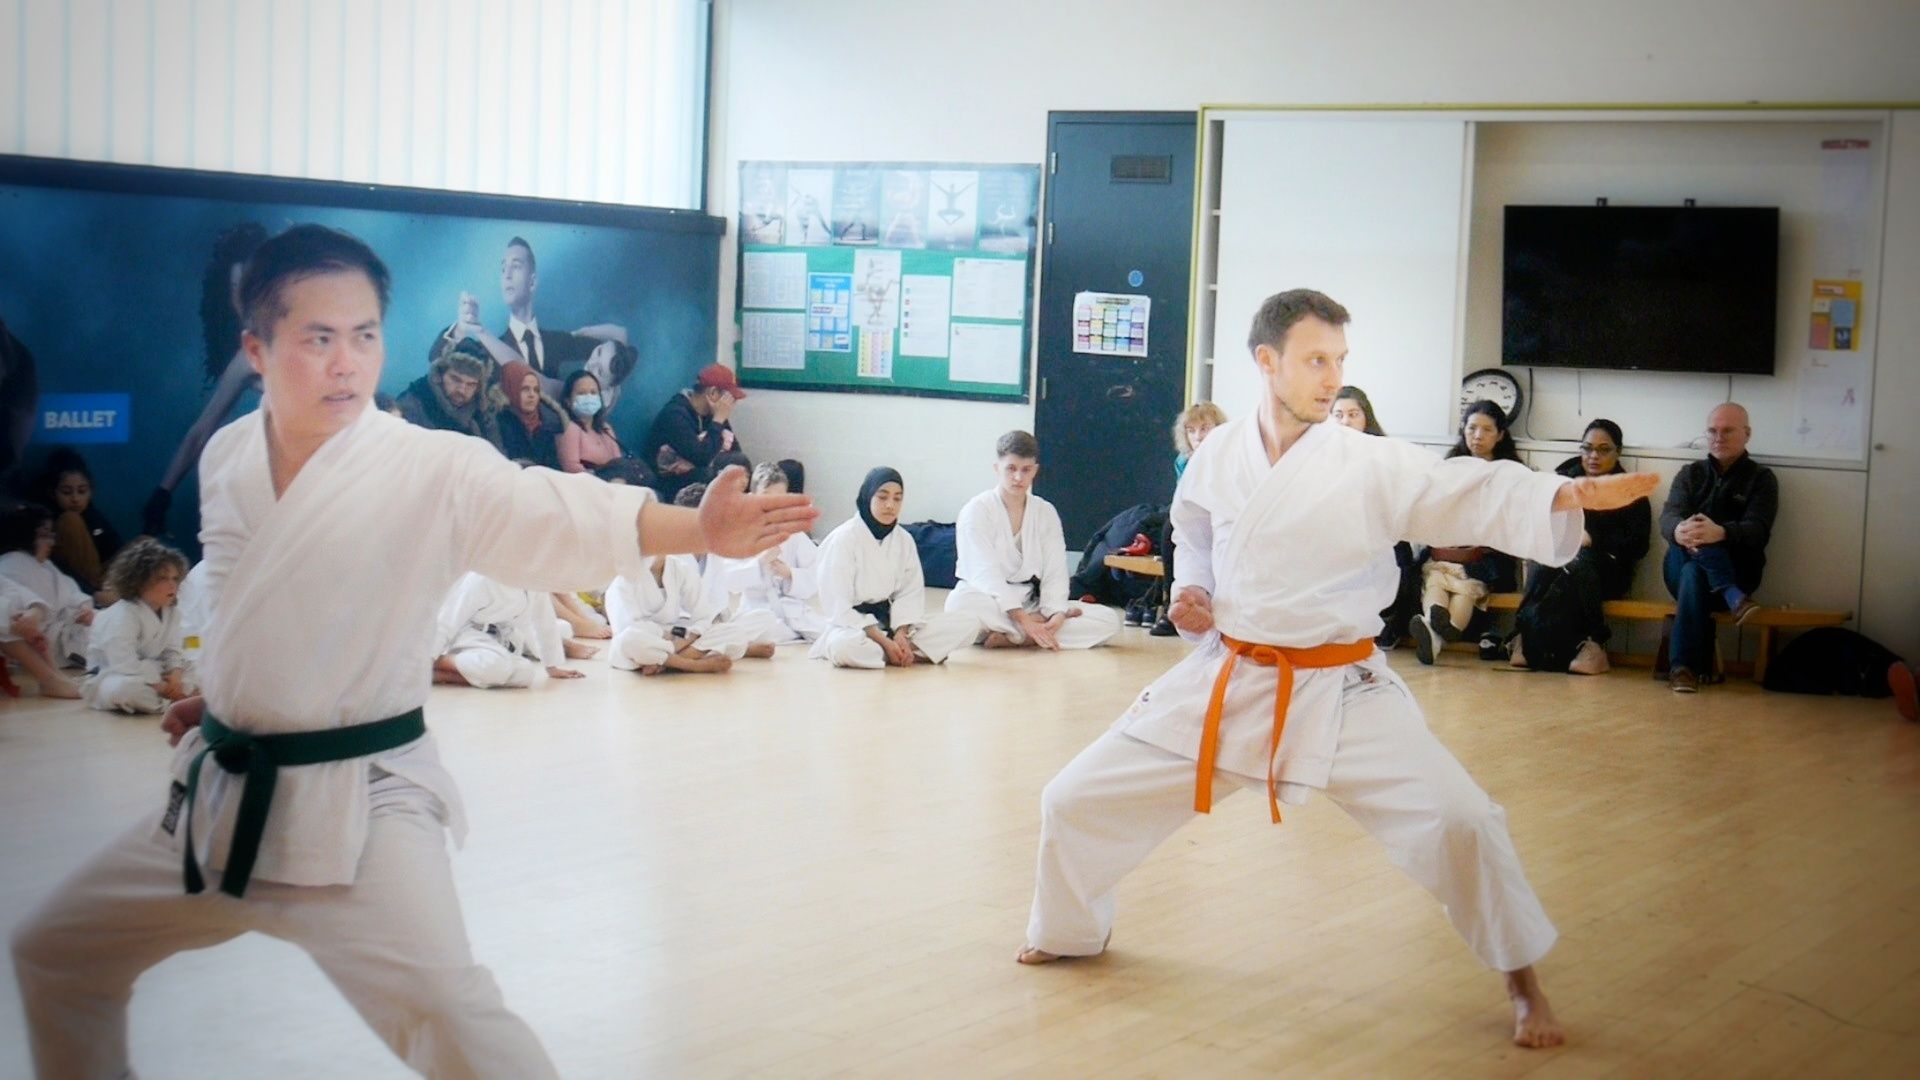 Info about what we offer and do at our dojo, My Karate Club. Grading, philosophy of training, private classes and more.